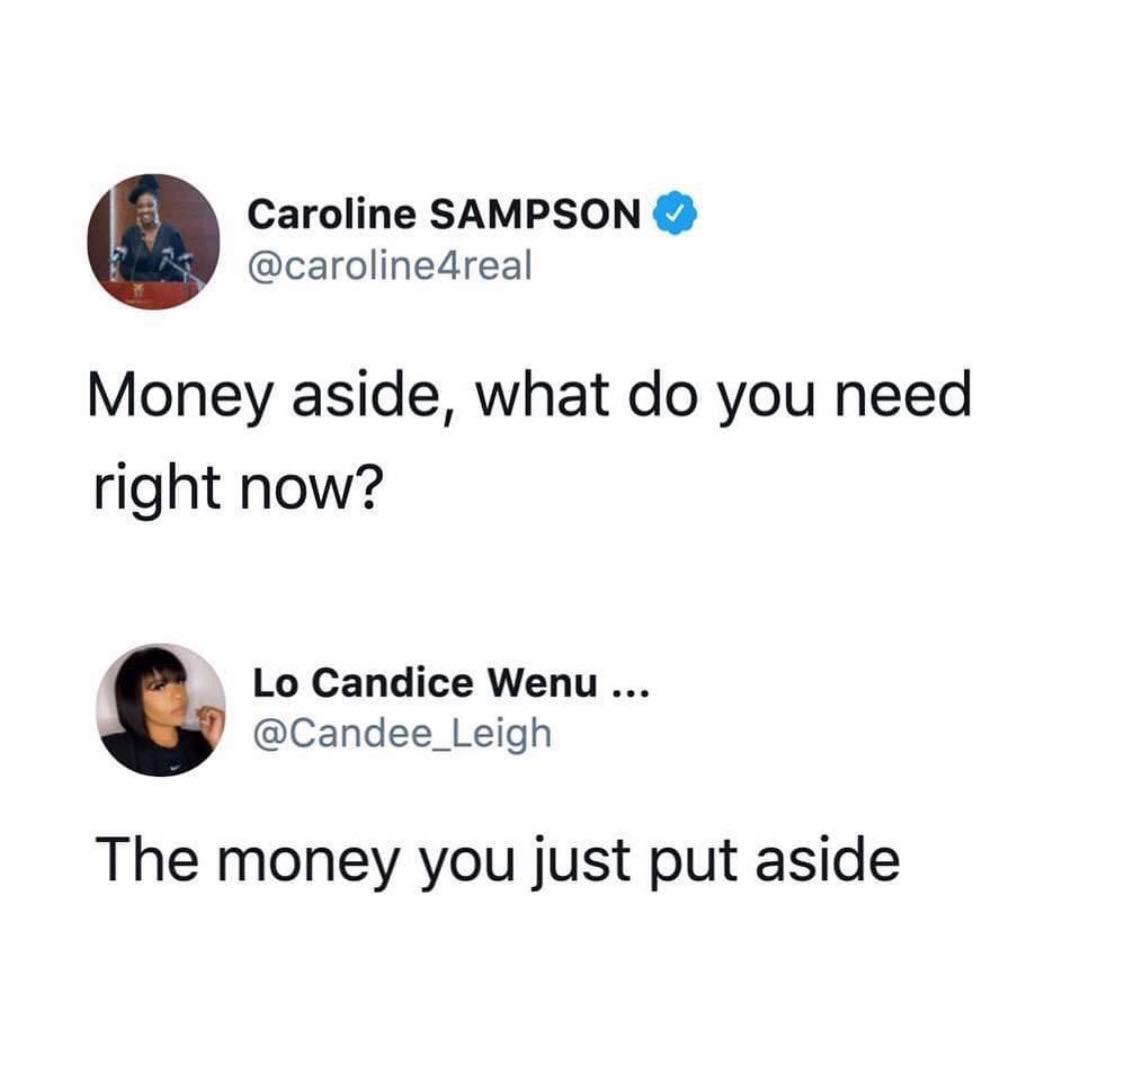 Caroline Sampson Money aside, what do you need right now? Lo Candice Wenu ... The money you just put aside